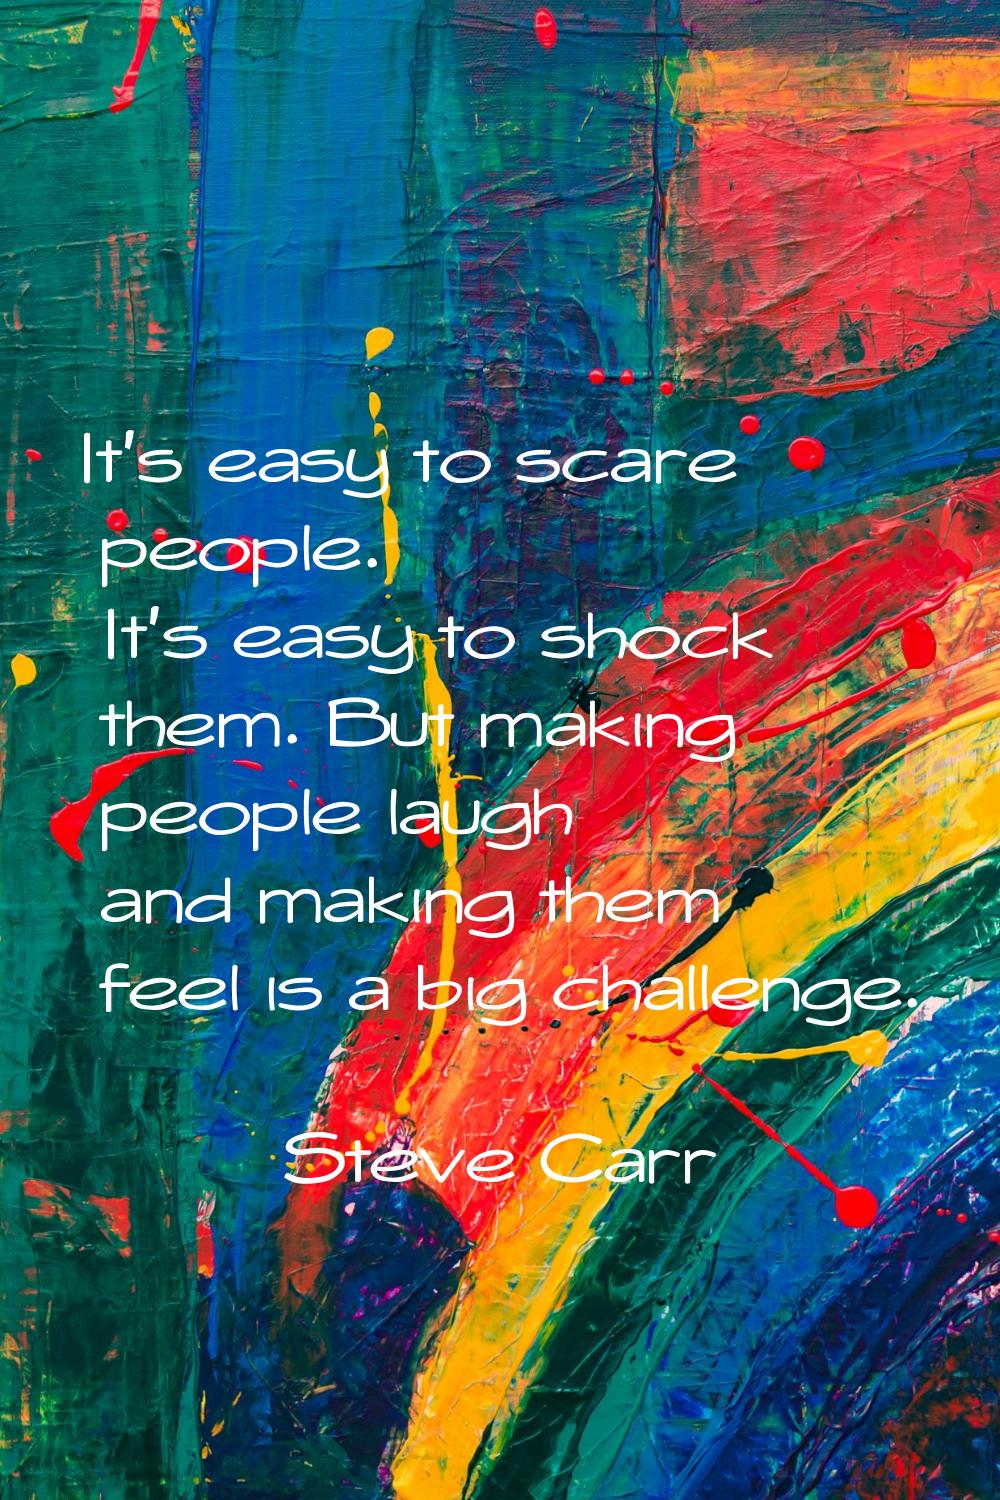 It's easy to scare people. It's easy to shock them. But making people laugh and making them feel is